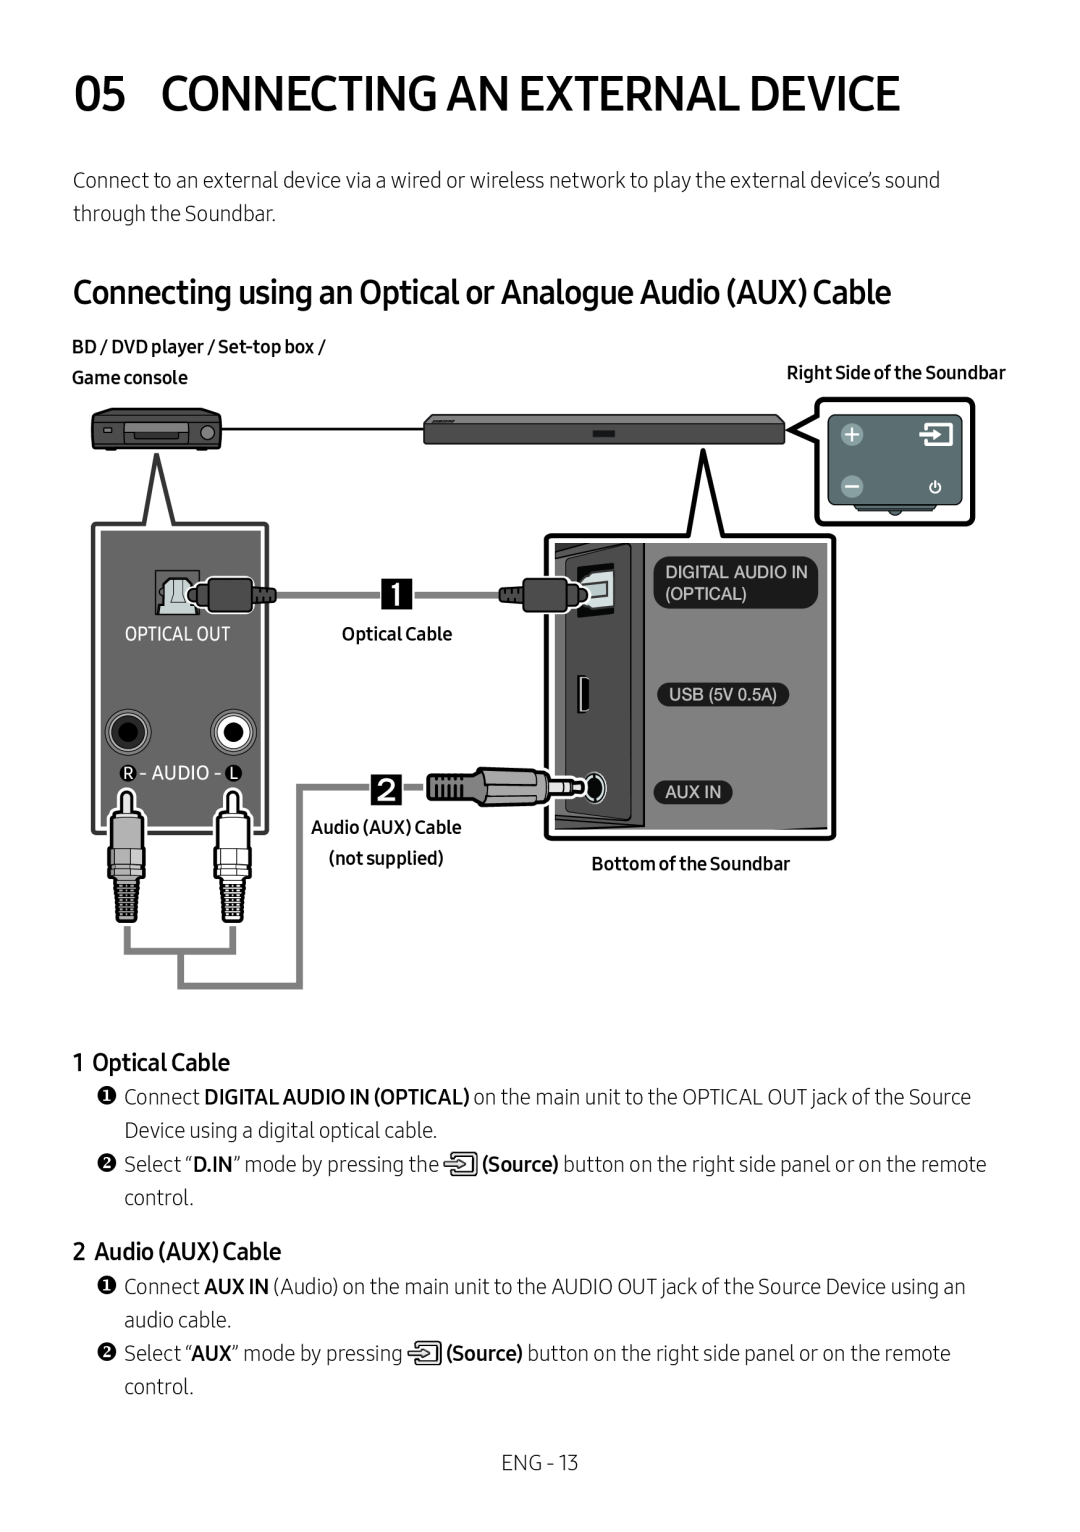 Samsung HW-M450/ZG Connecting An External Device, Connecting using an Optical or Analogue Audio AUX Cable, Optical Cable 